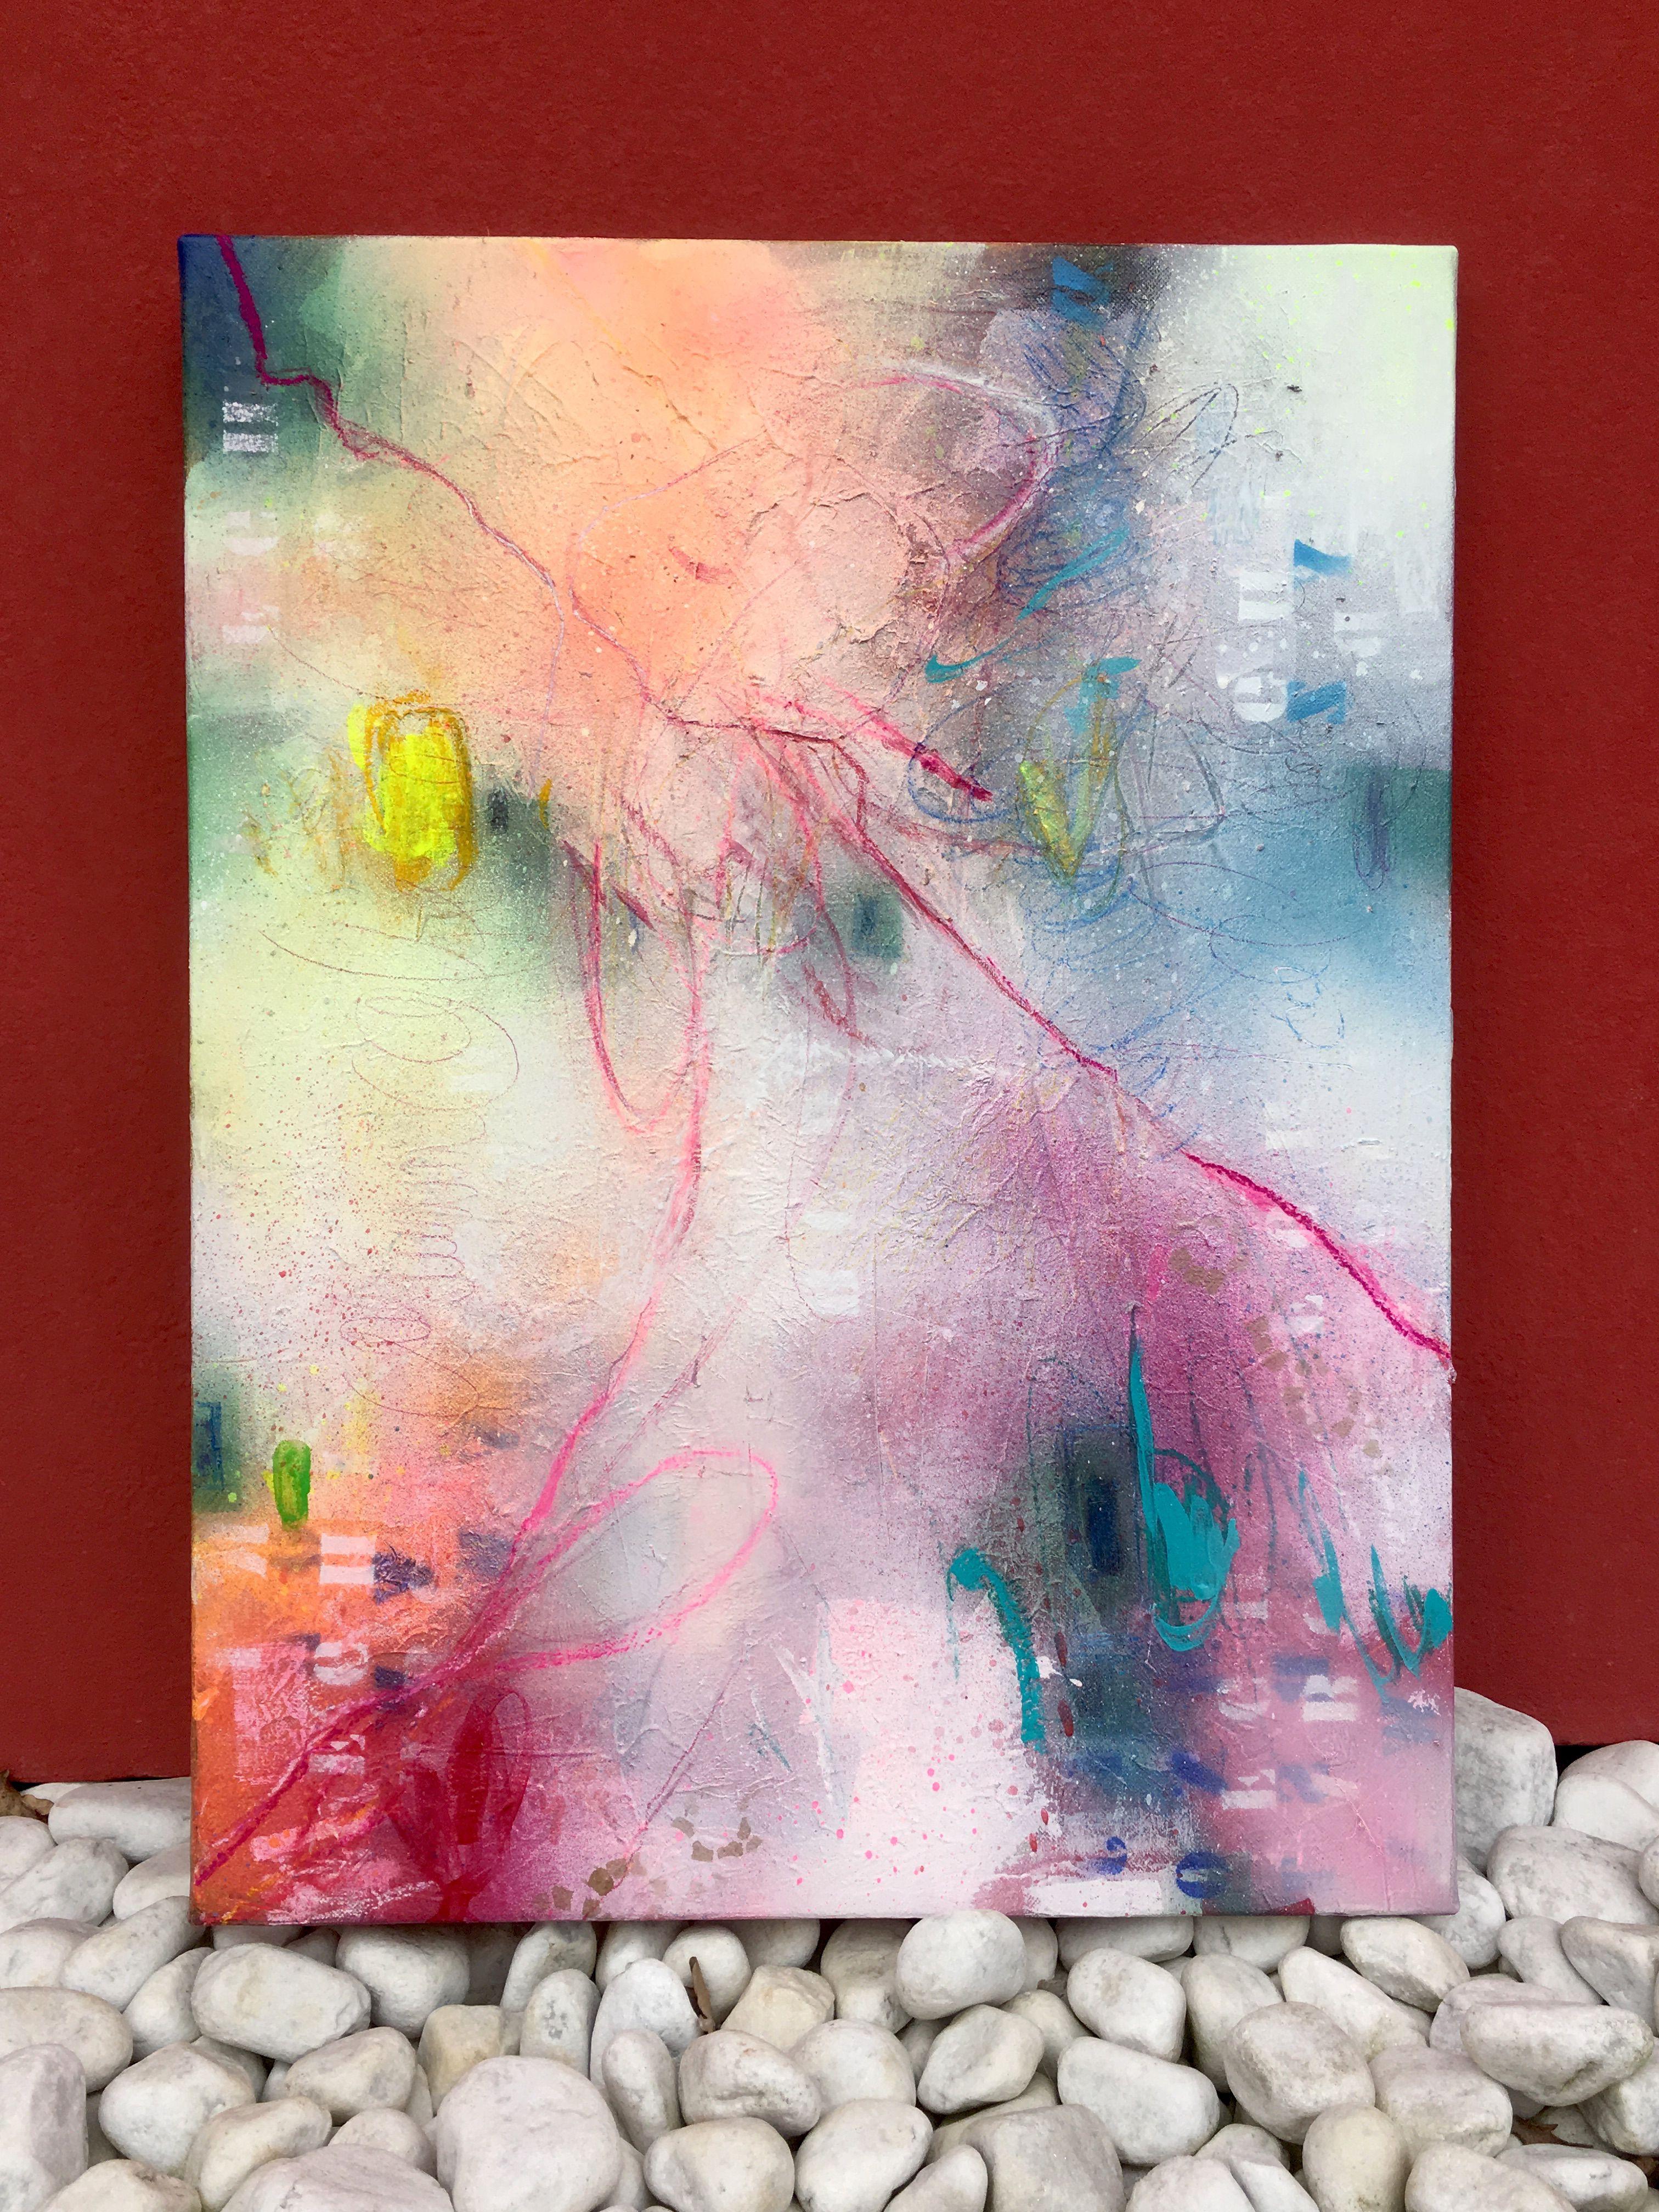 Far from words IV, Mixed Media on Canvas - Abstract Mixed Media Art by Bea Garding Schubert